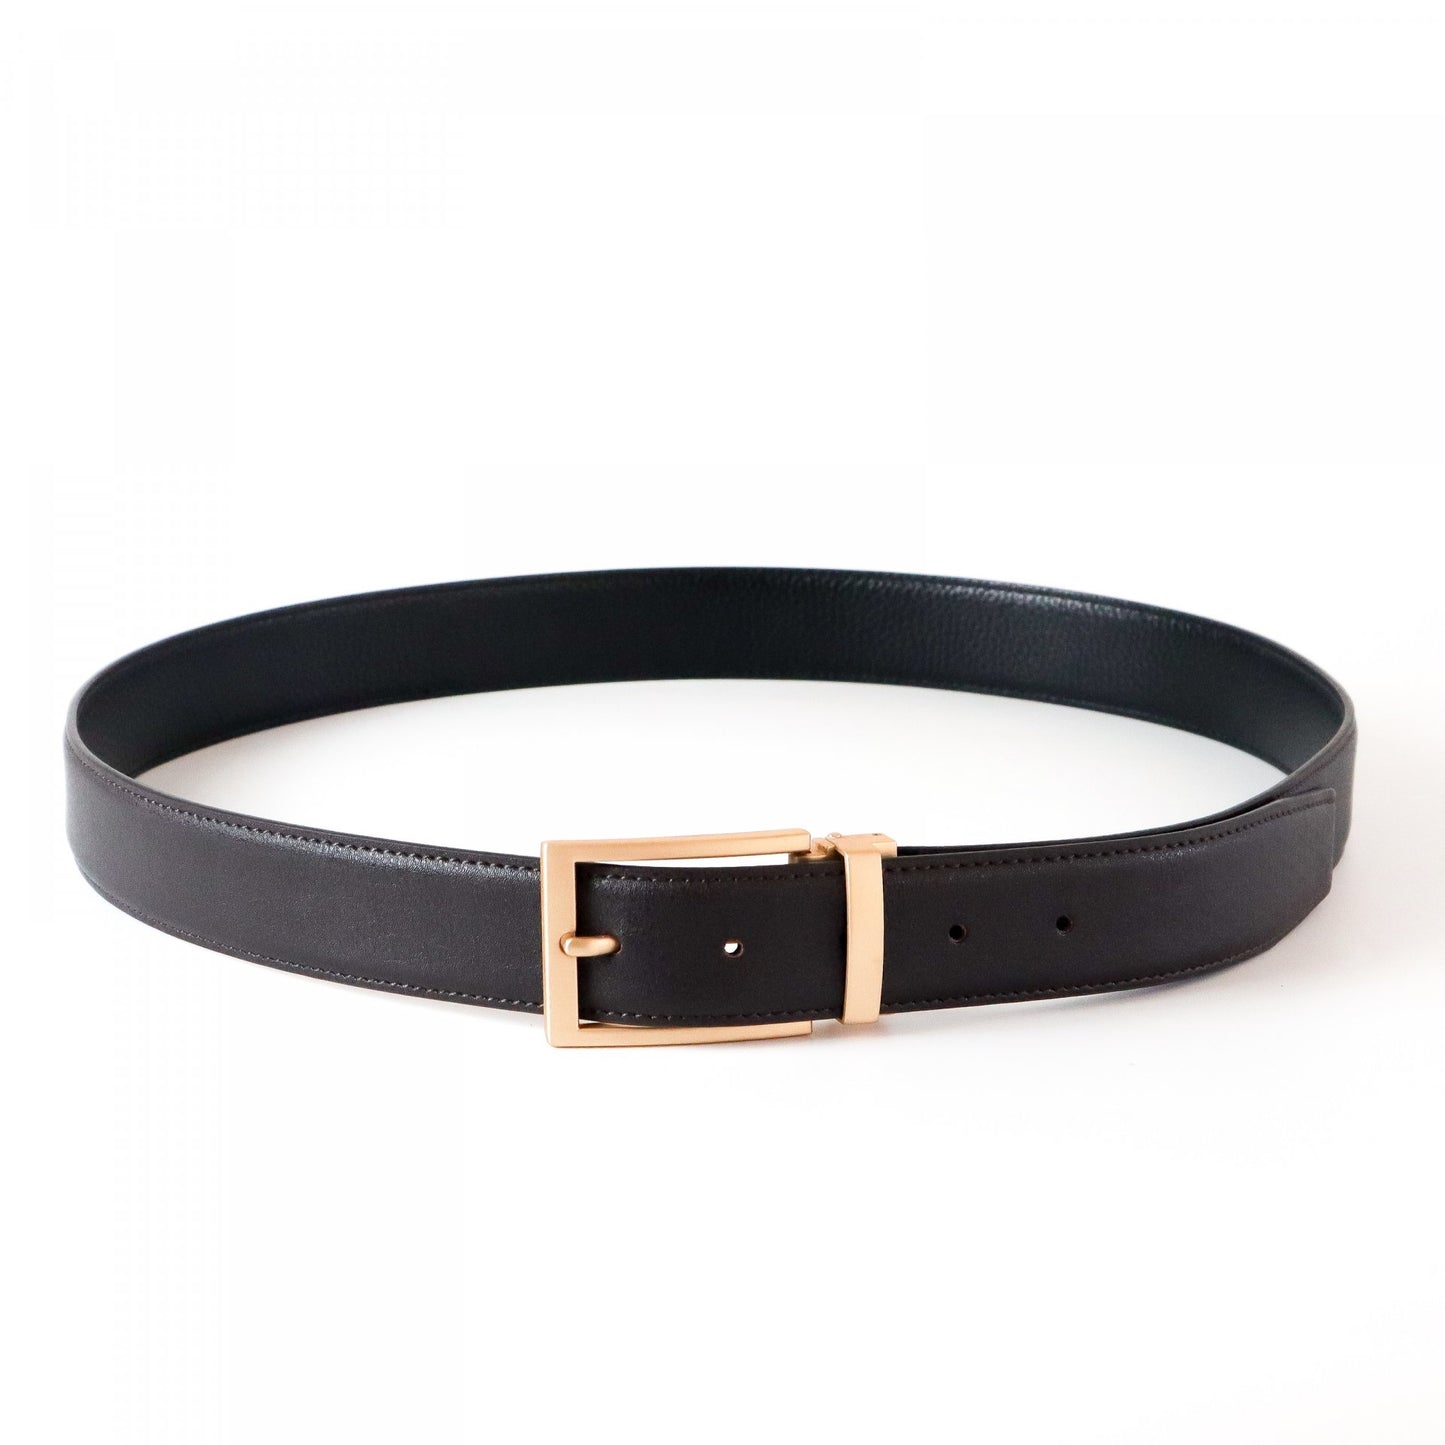 Verona Leather Belt in Rose Gold Buckle for Everyday wear in Black